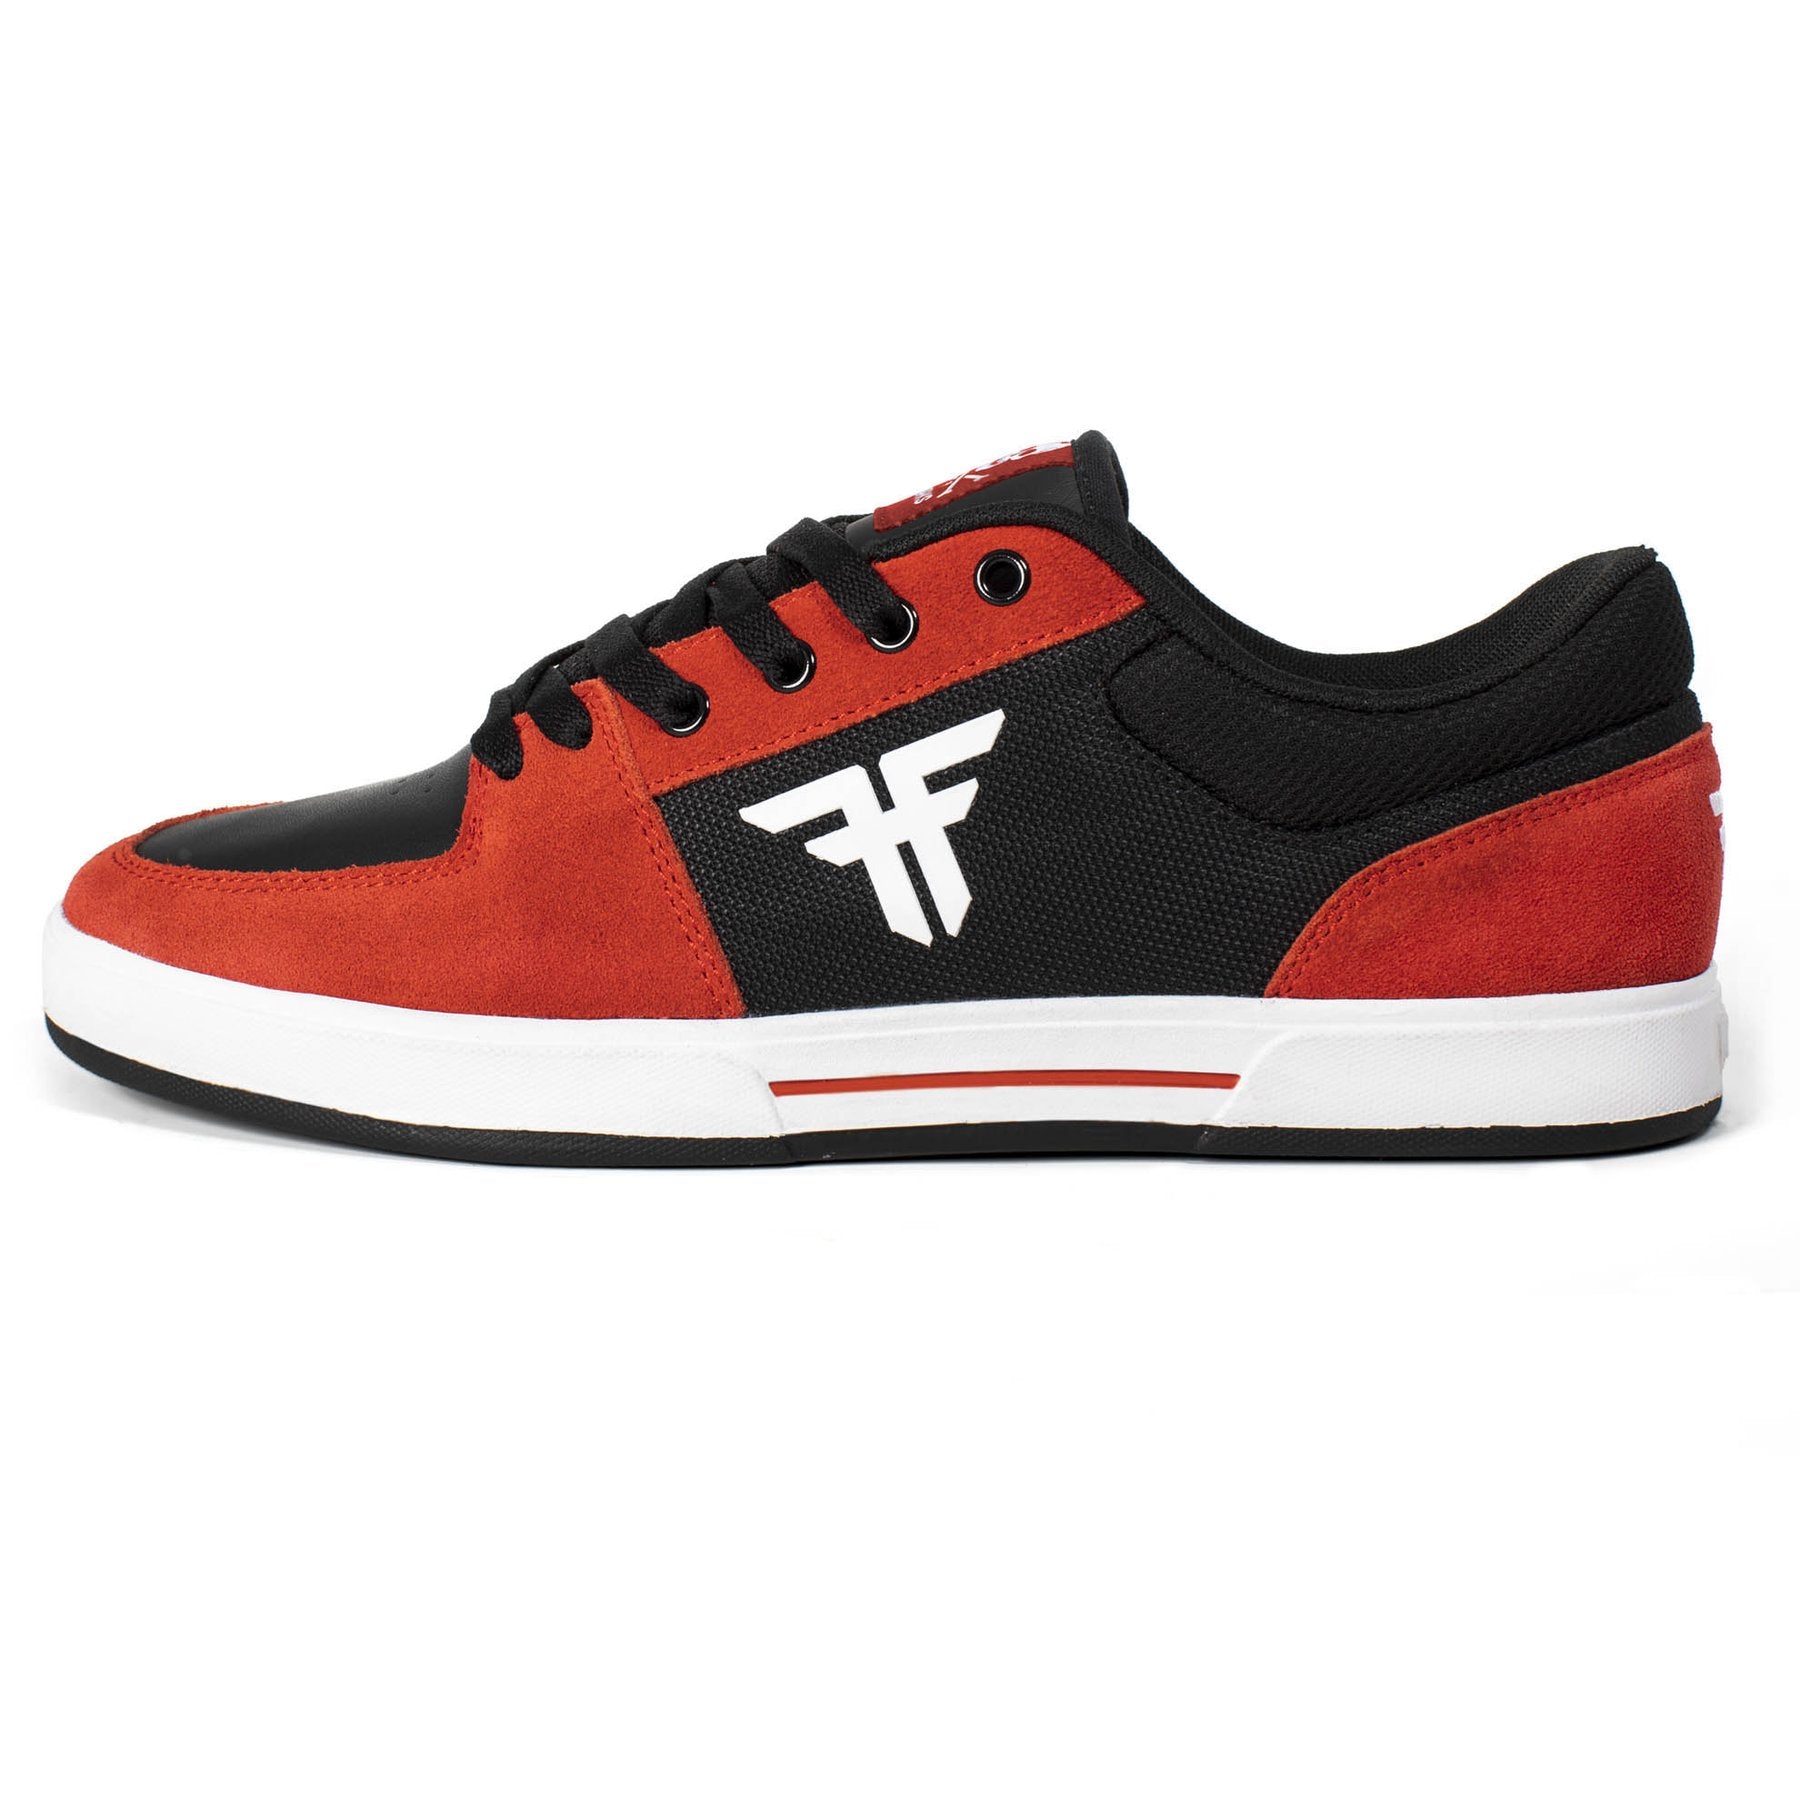 Fallen Skateboard Shoes - Patriot Billy Marks Black/Red/White - Invisible Board Shop